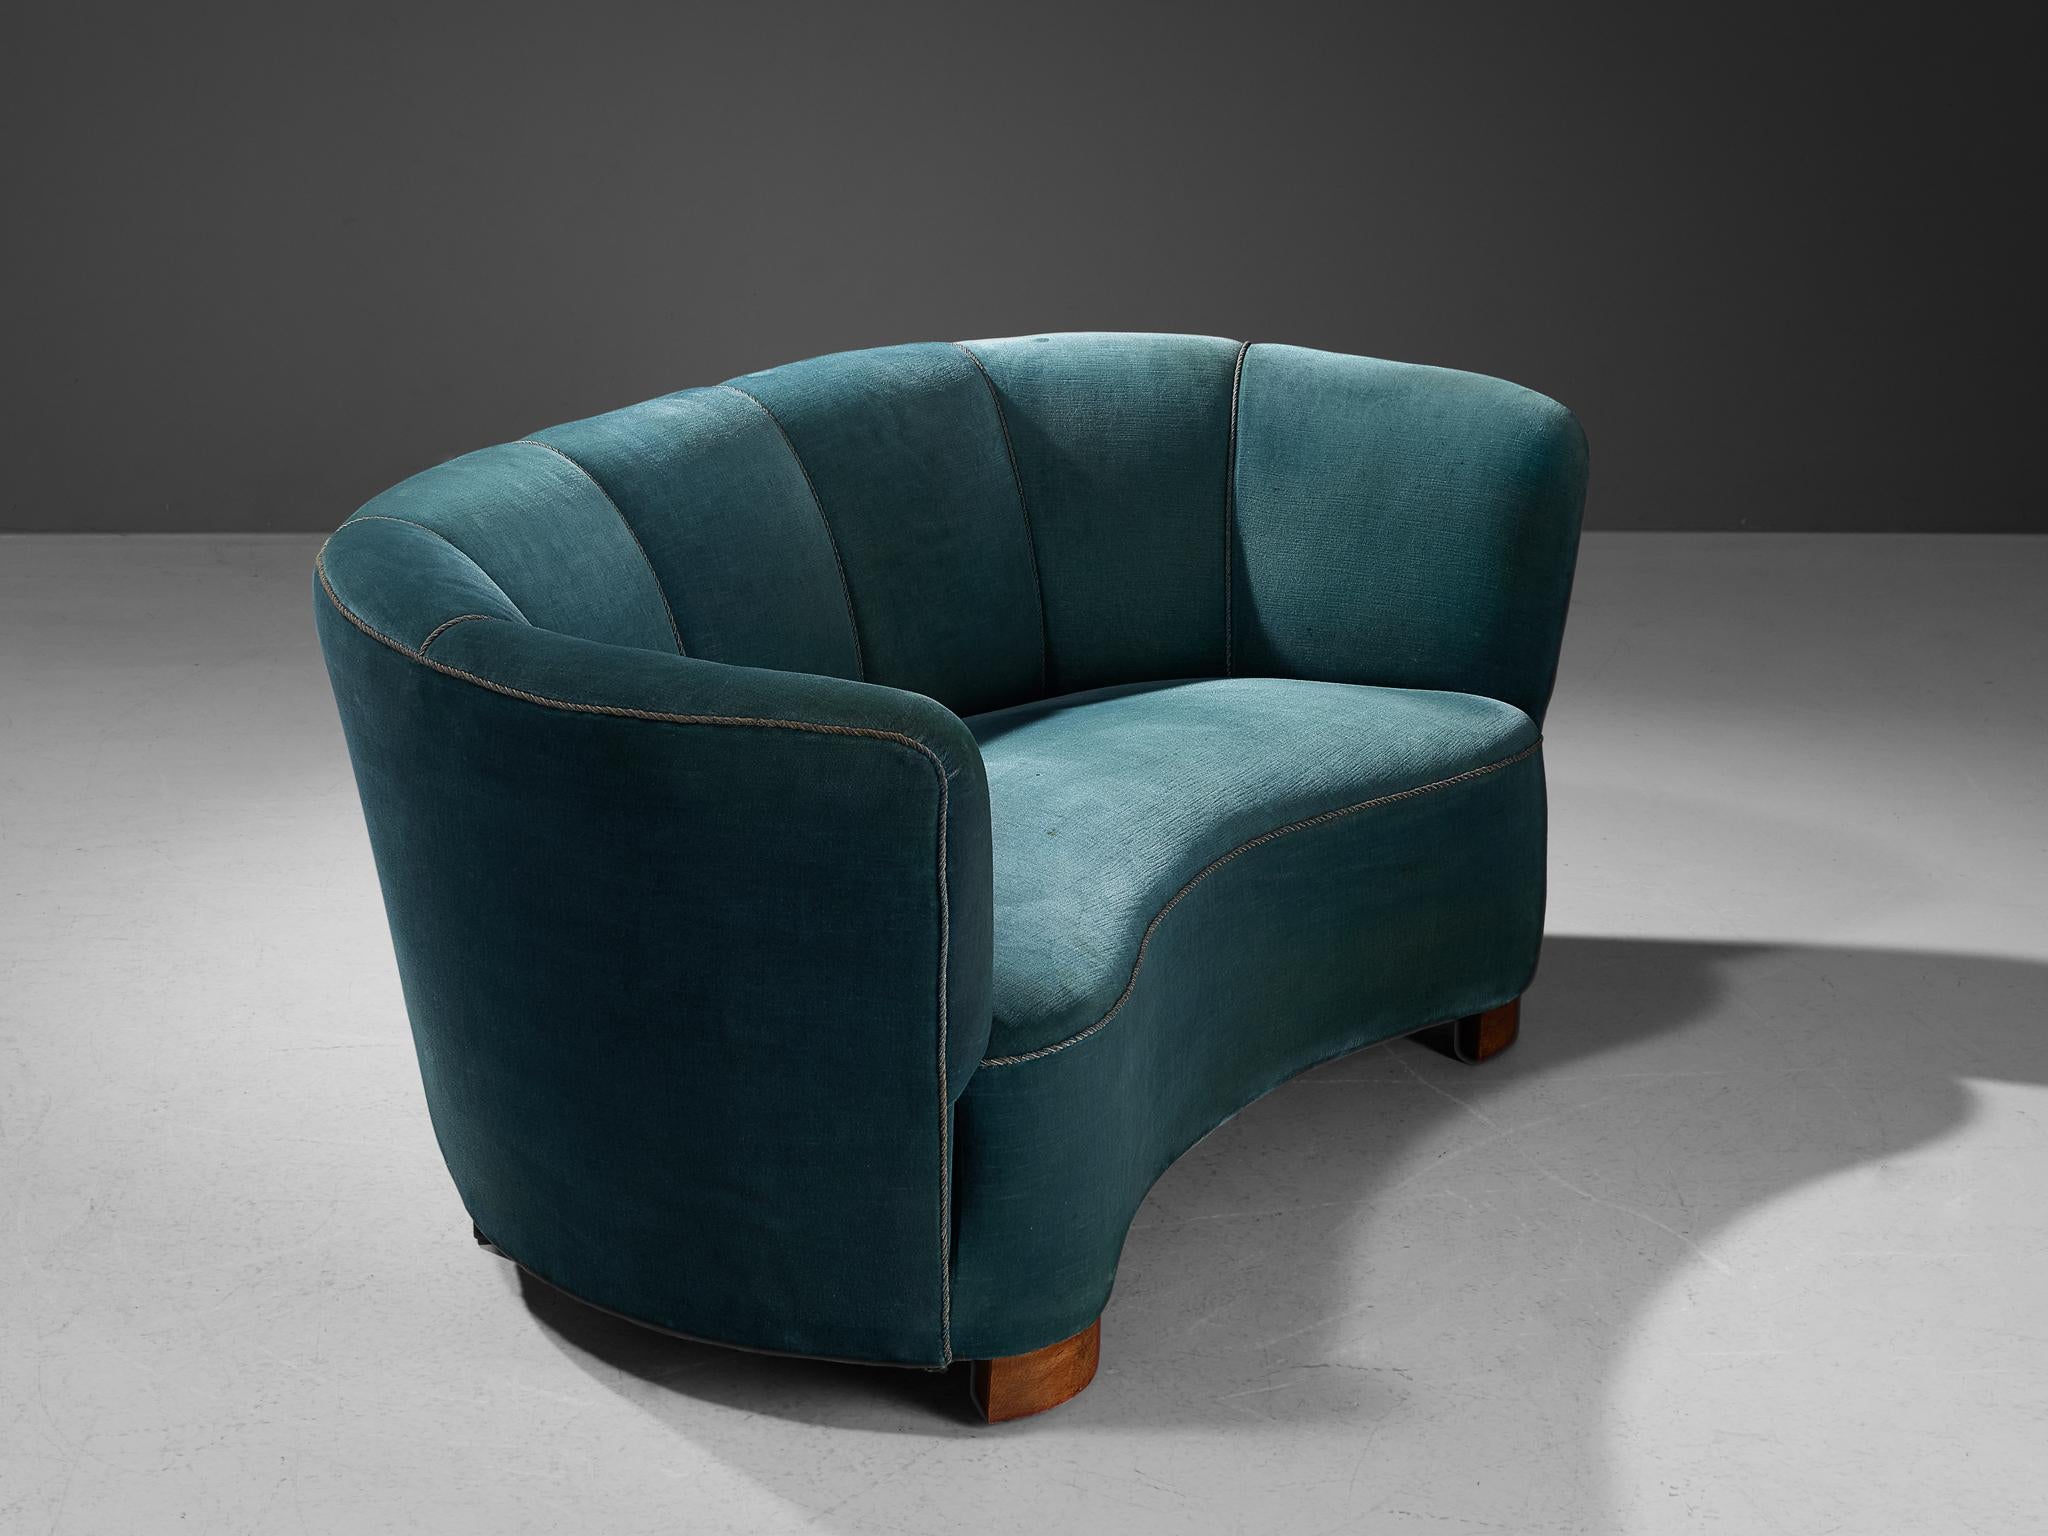 Banana sofa, velvet, wood, Denmark, 1940s

This voluptuous sofa is based on a solid construction of round shapes and curvaceous lines. The seating area and the backrest are organically shaped and together with the absence of strict angles, the sofa